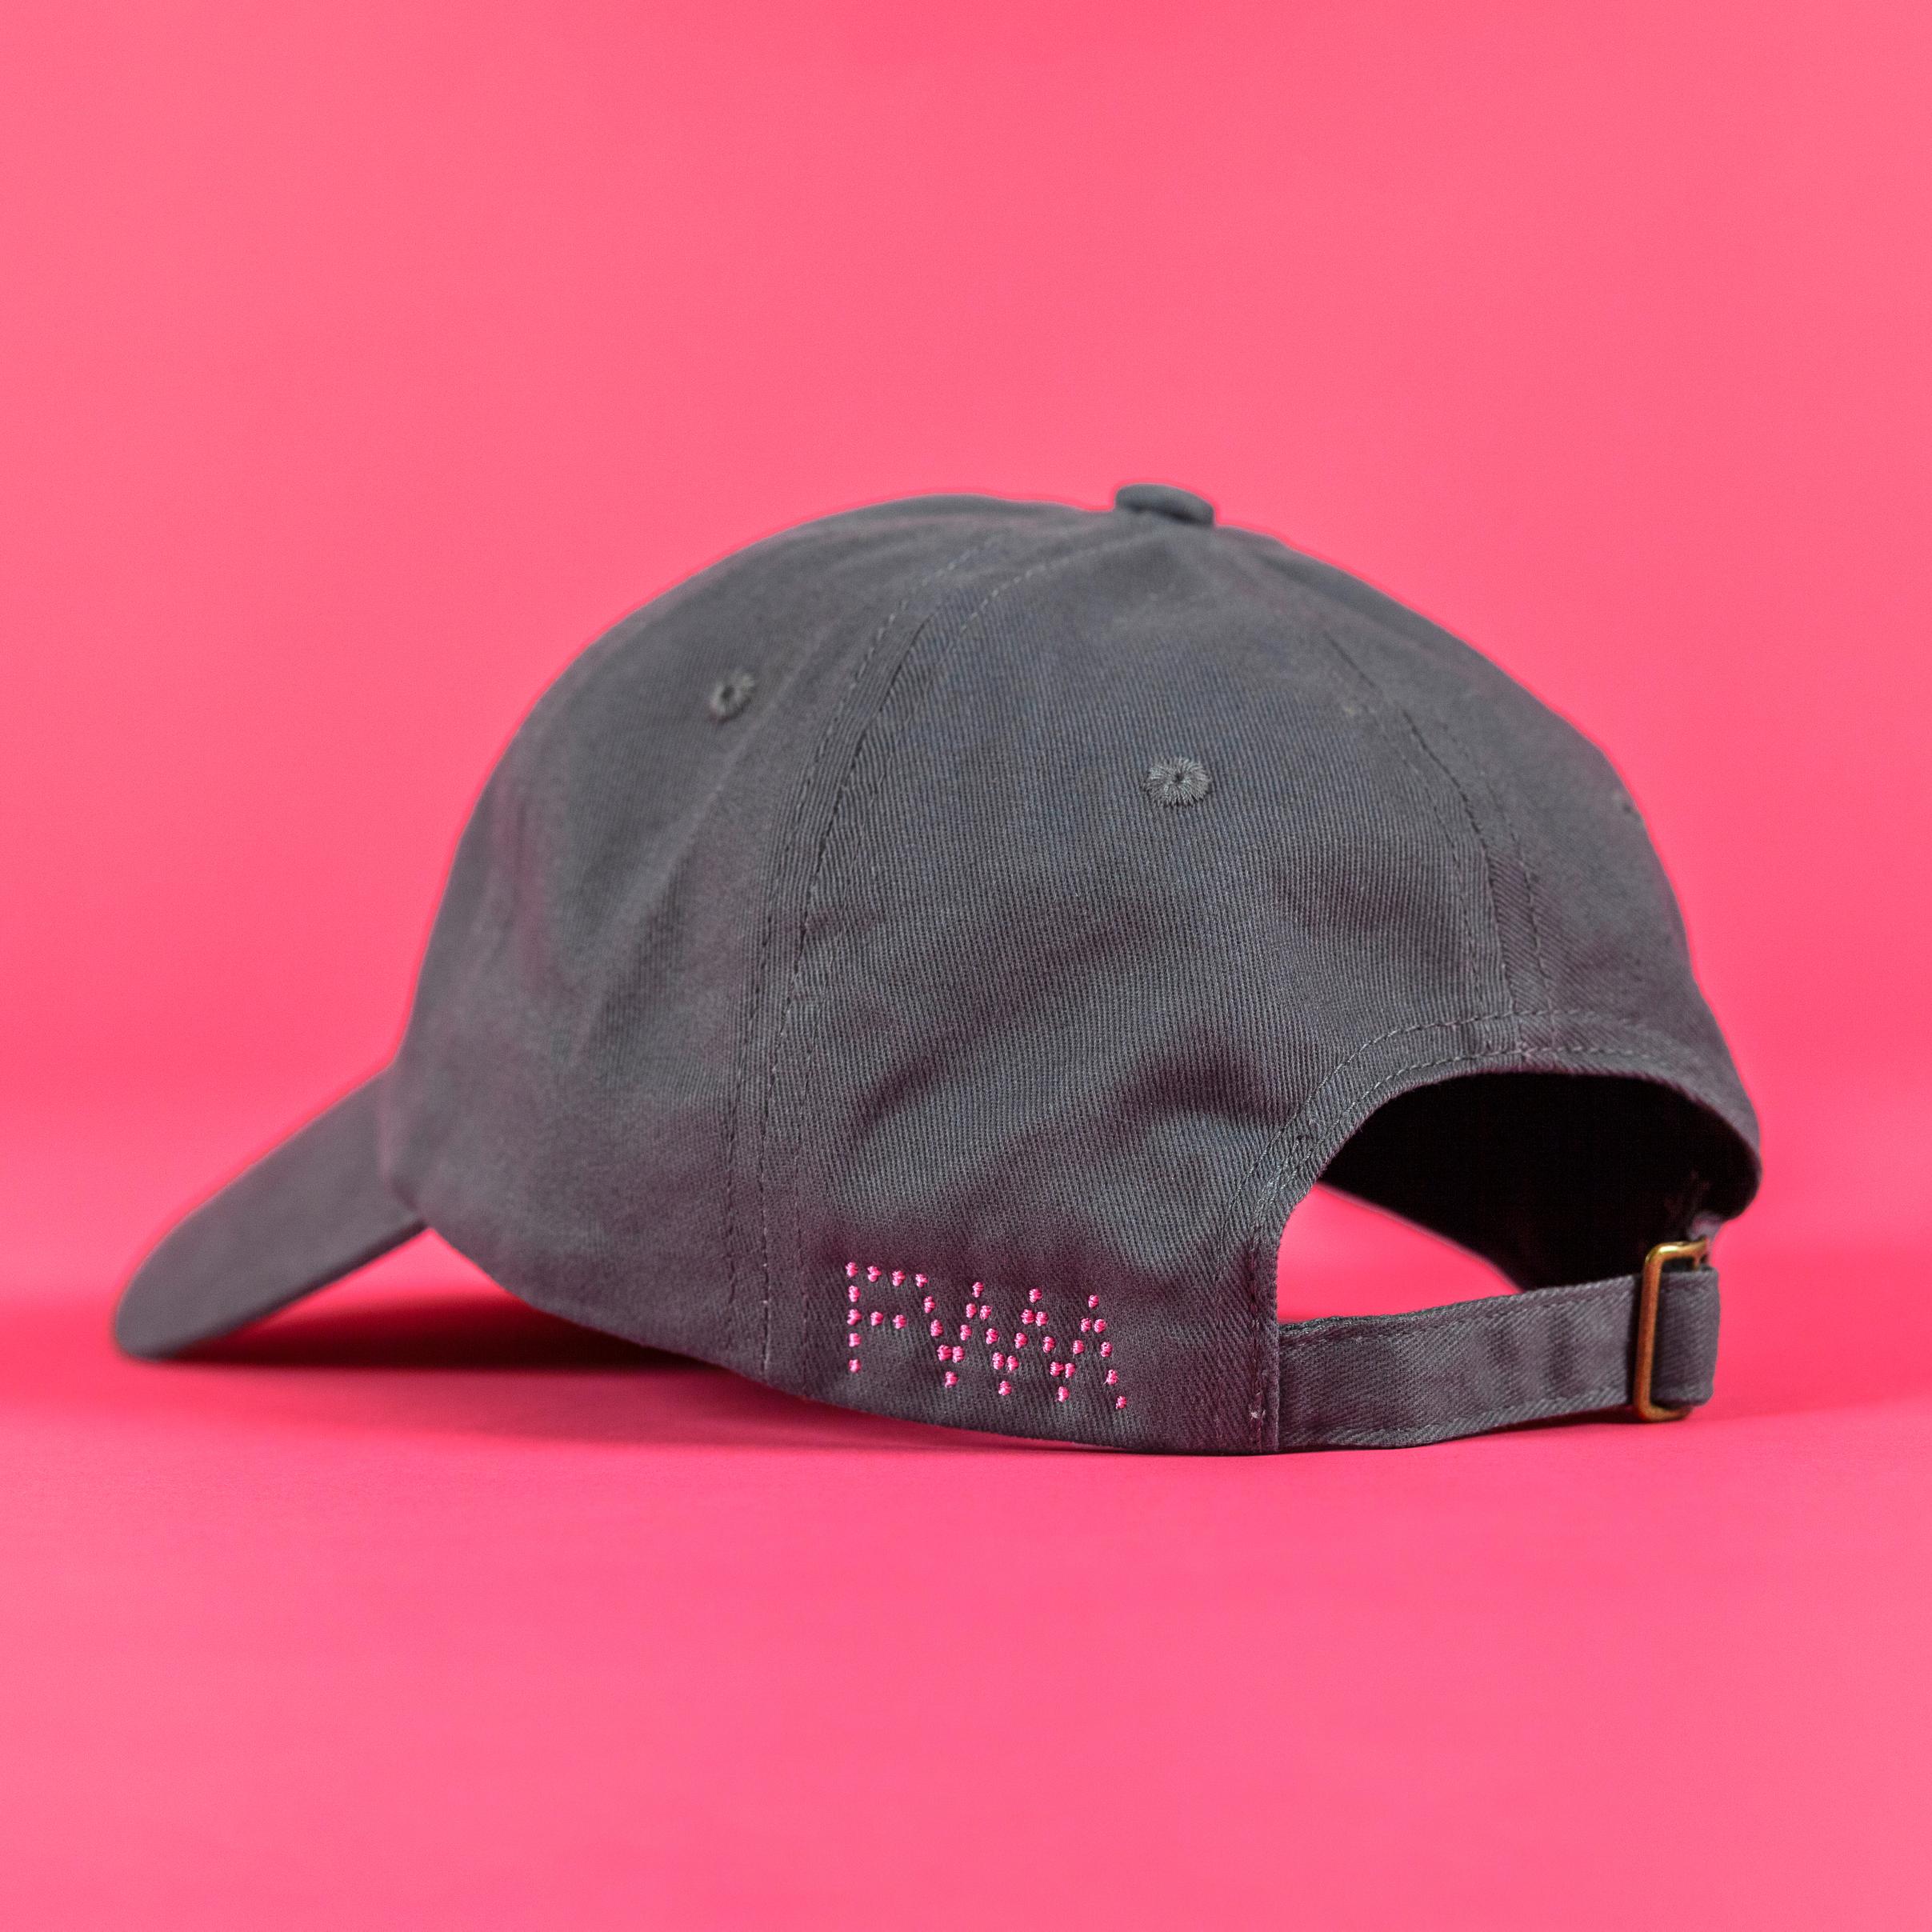 The grey baseball cap is against a bright pink background facing away from the camera. On the right side of the back, you can see the FWM logo embroidered in pink dots.